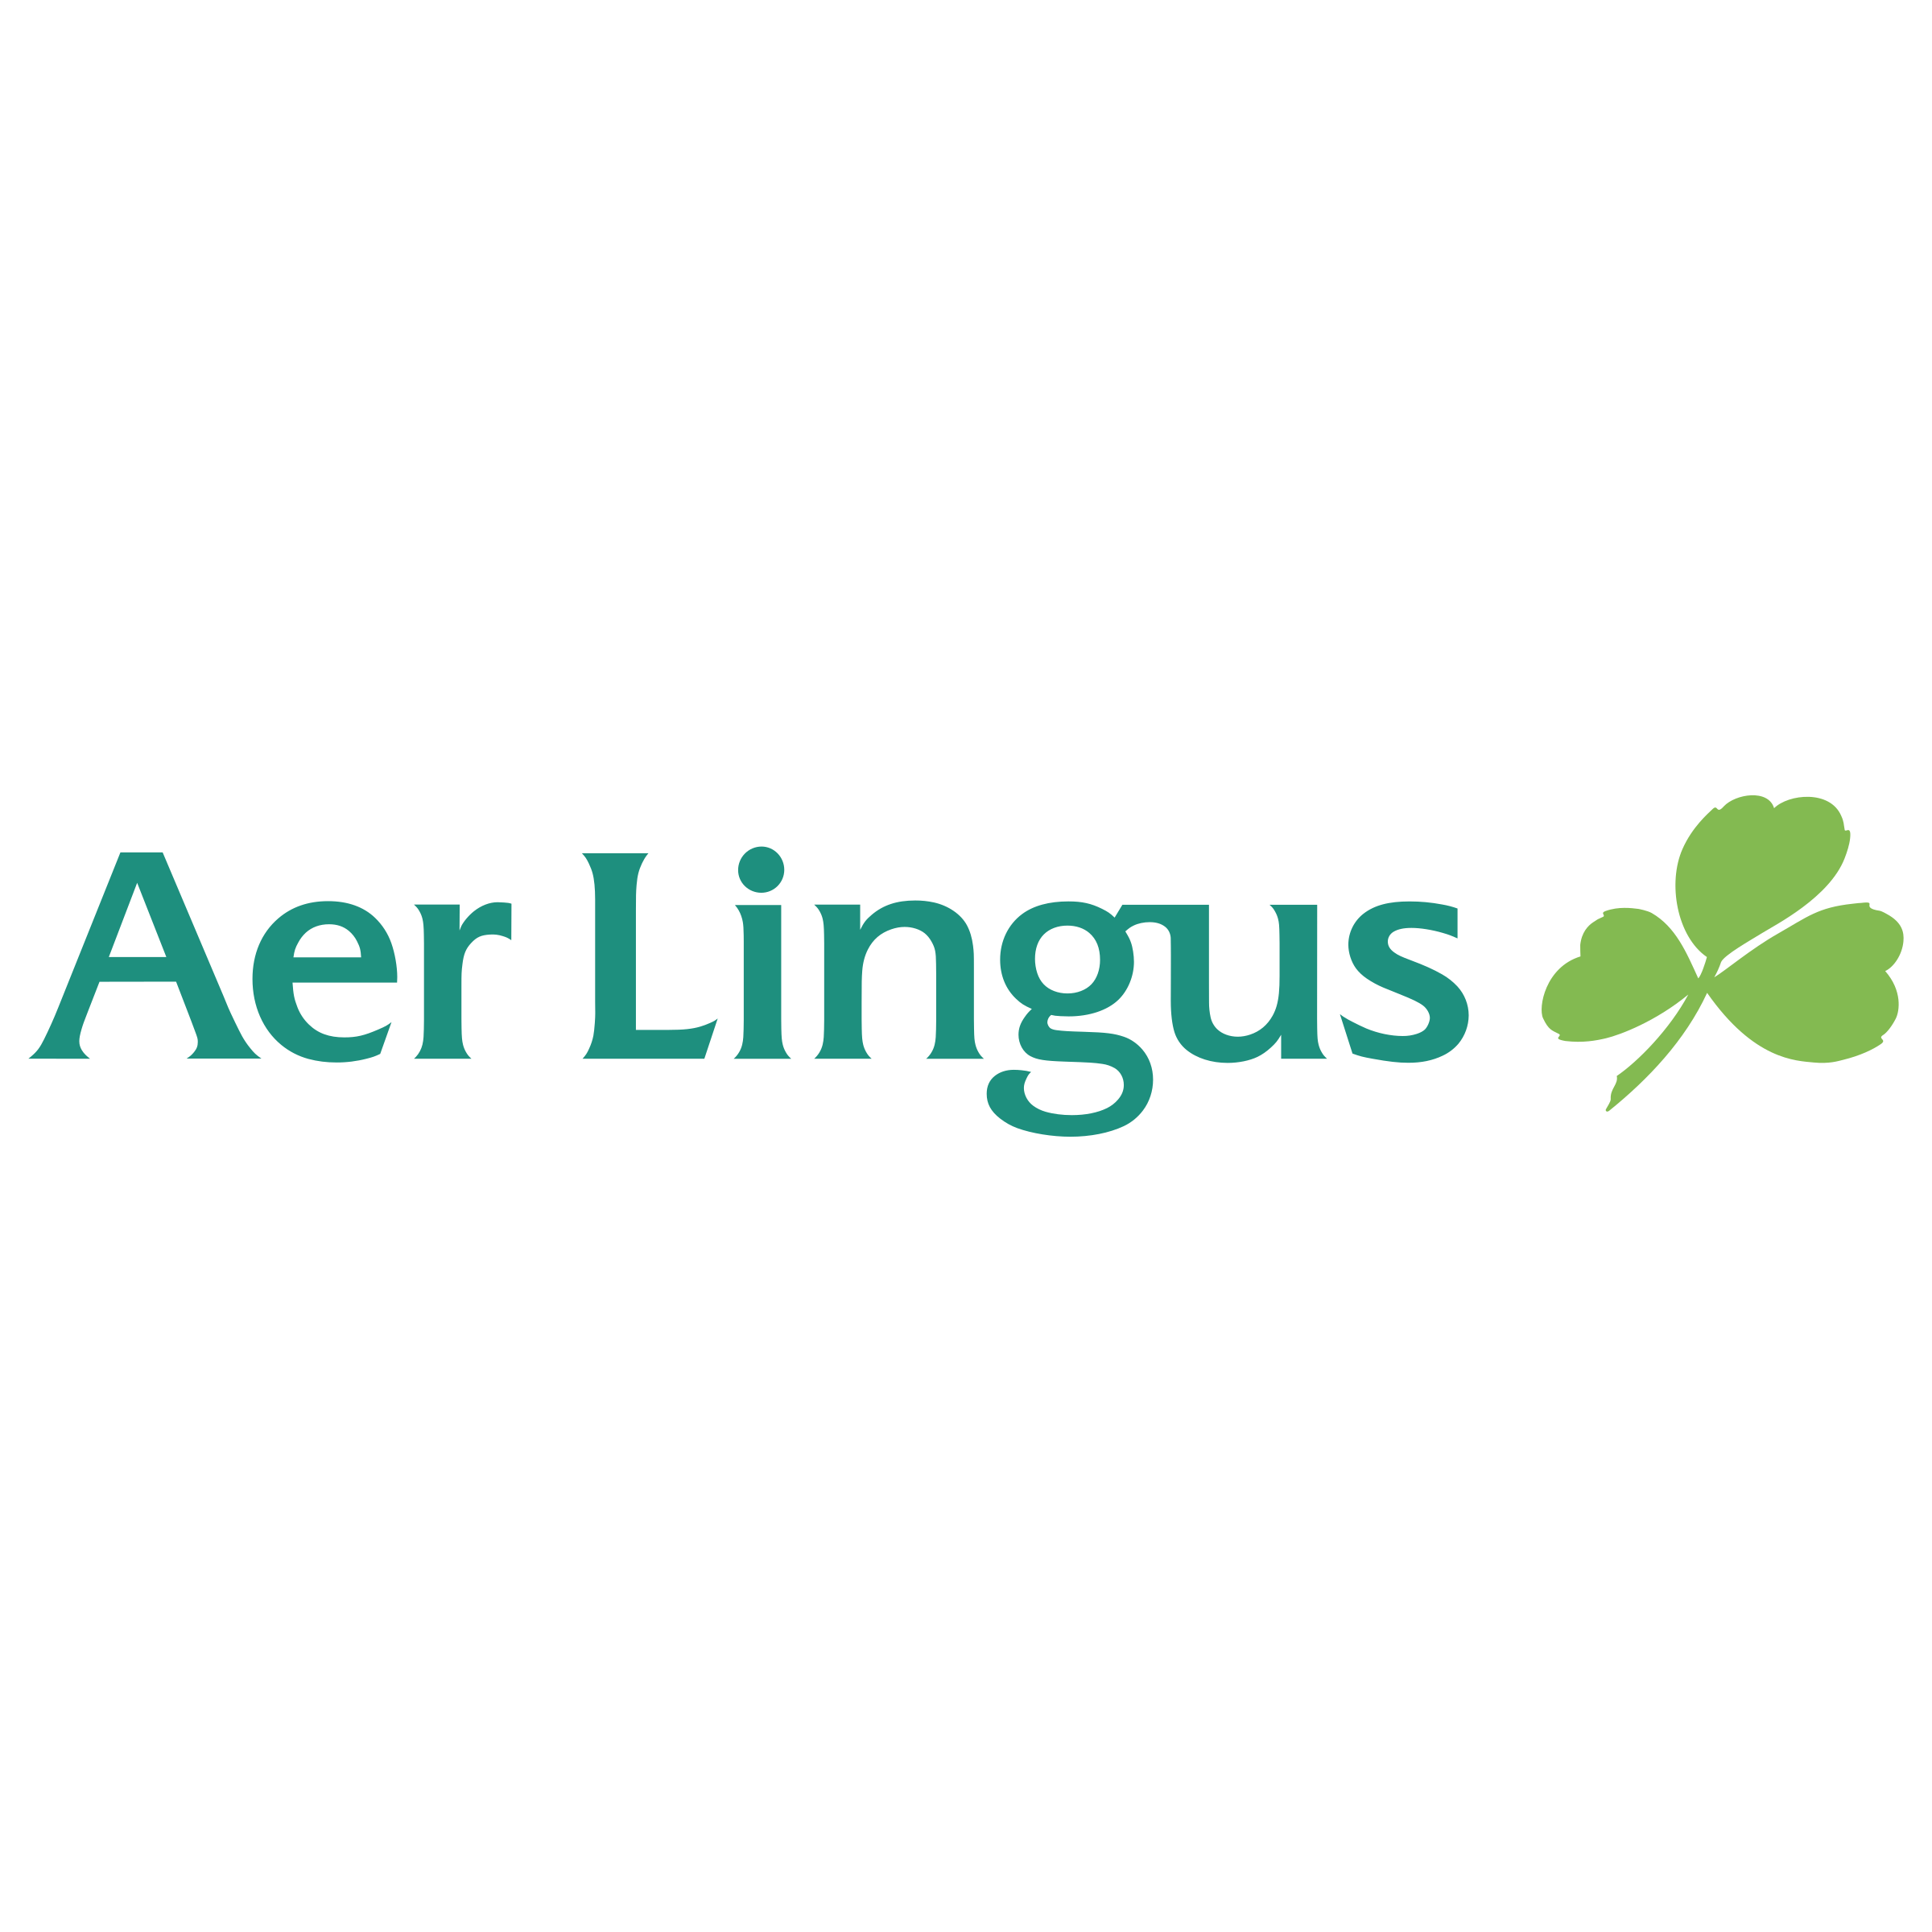 National airline of Ireland - Aer Lingus